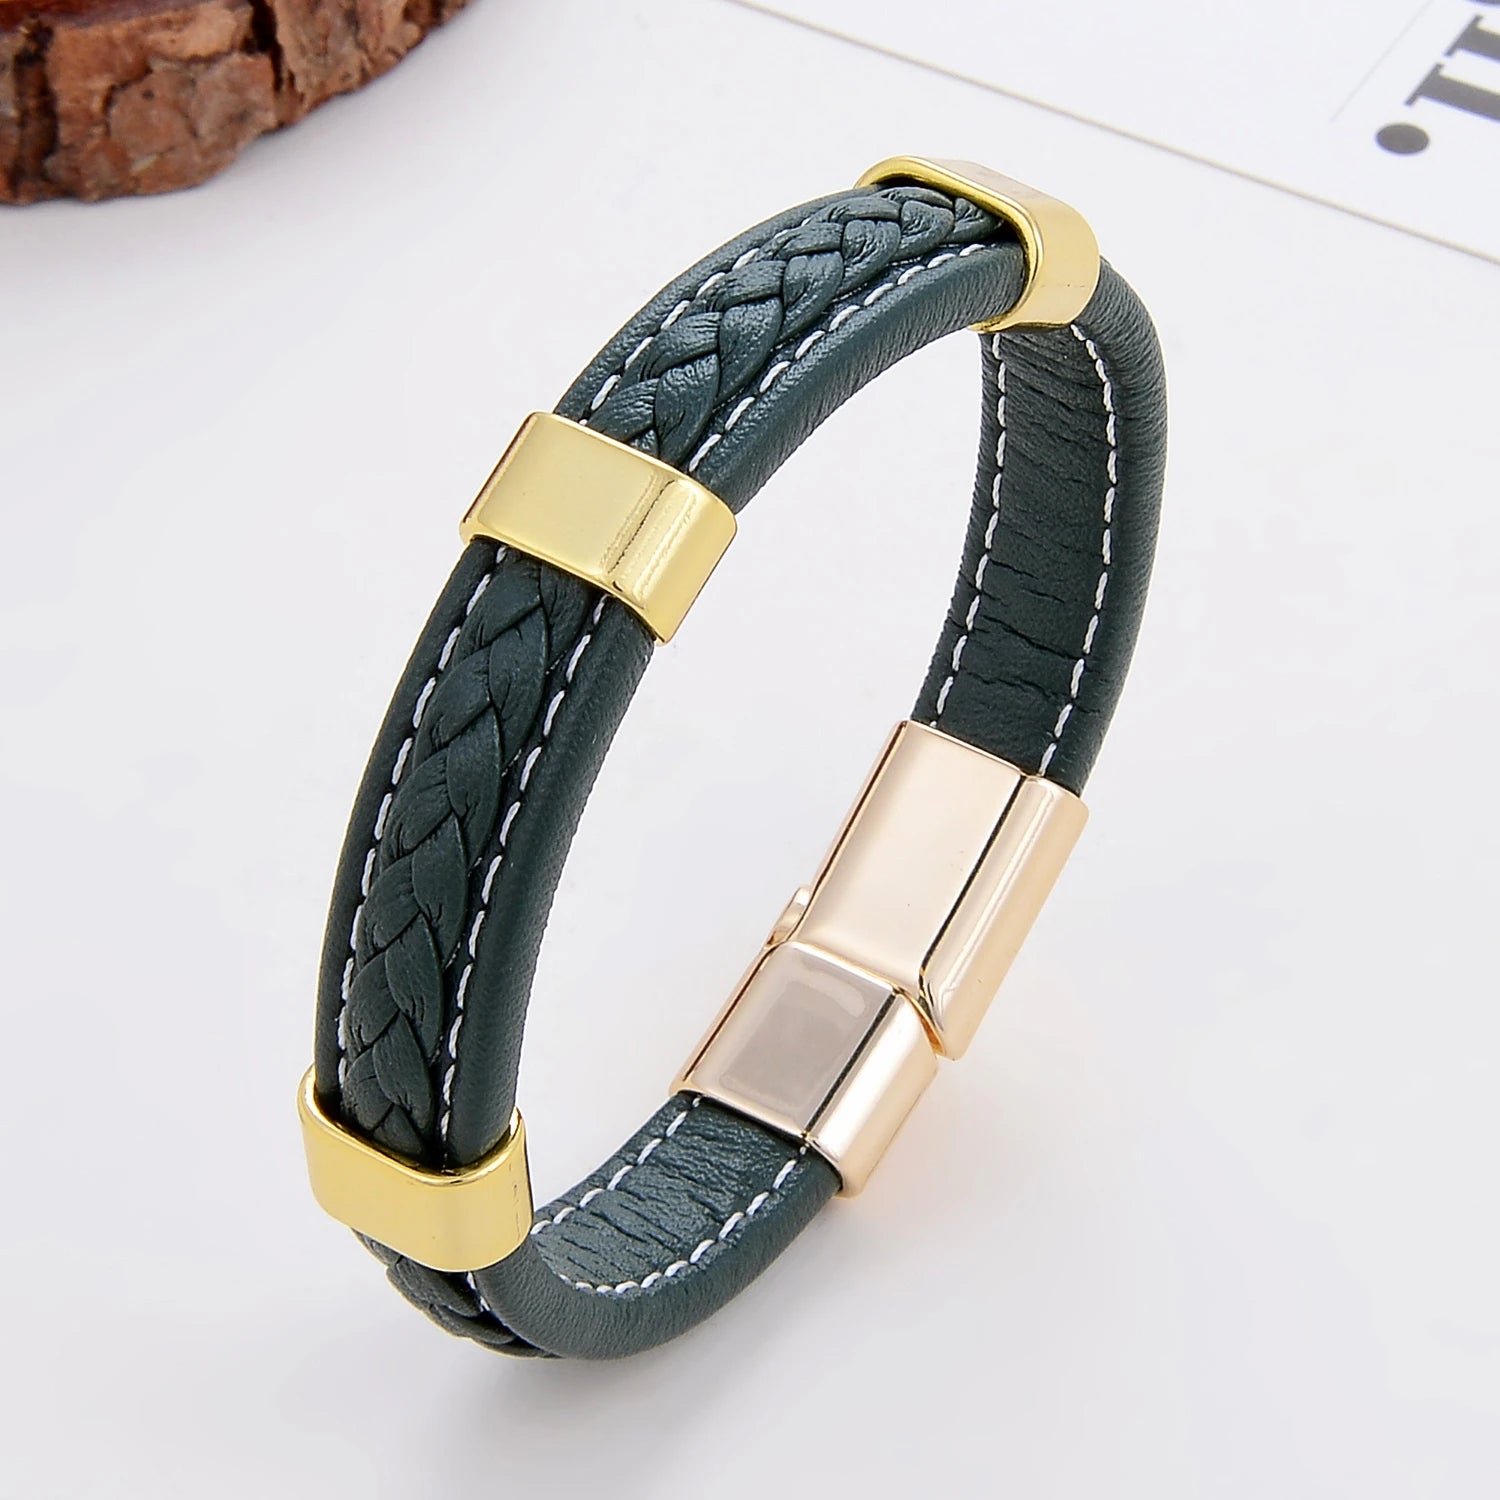 Elevate Their Style with Our Classic Woven Leather Bracelet for Boys and Girls!